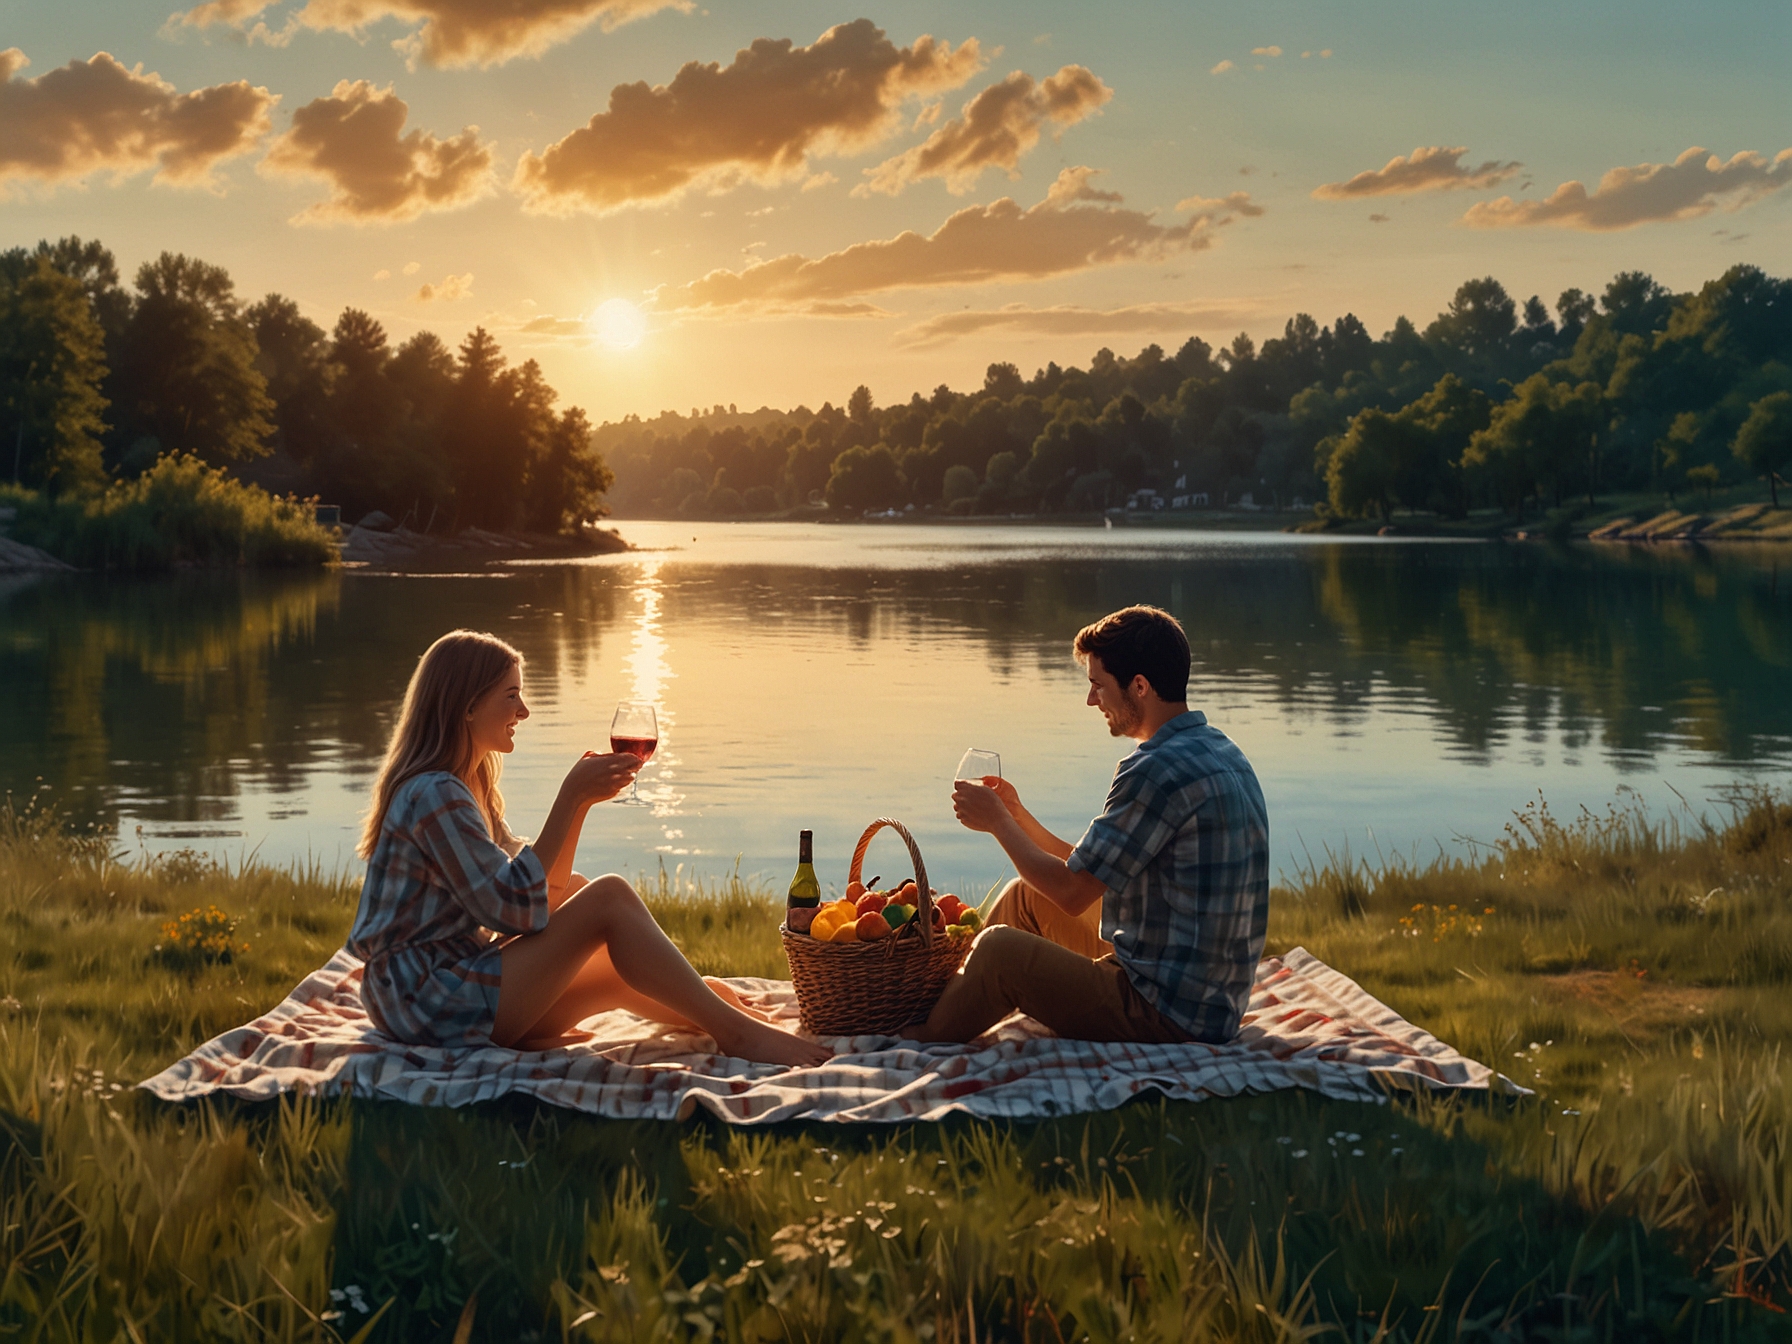 A serene lakeside picnic featuring a couple seated on a cozy blanket, surrounded by a wicker basket filled with gourmet snacks and a bottle of wine, set against a panoramic water view.